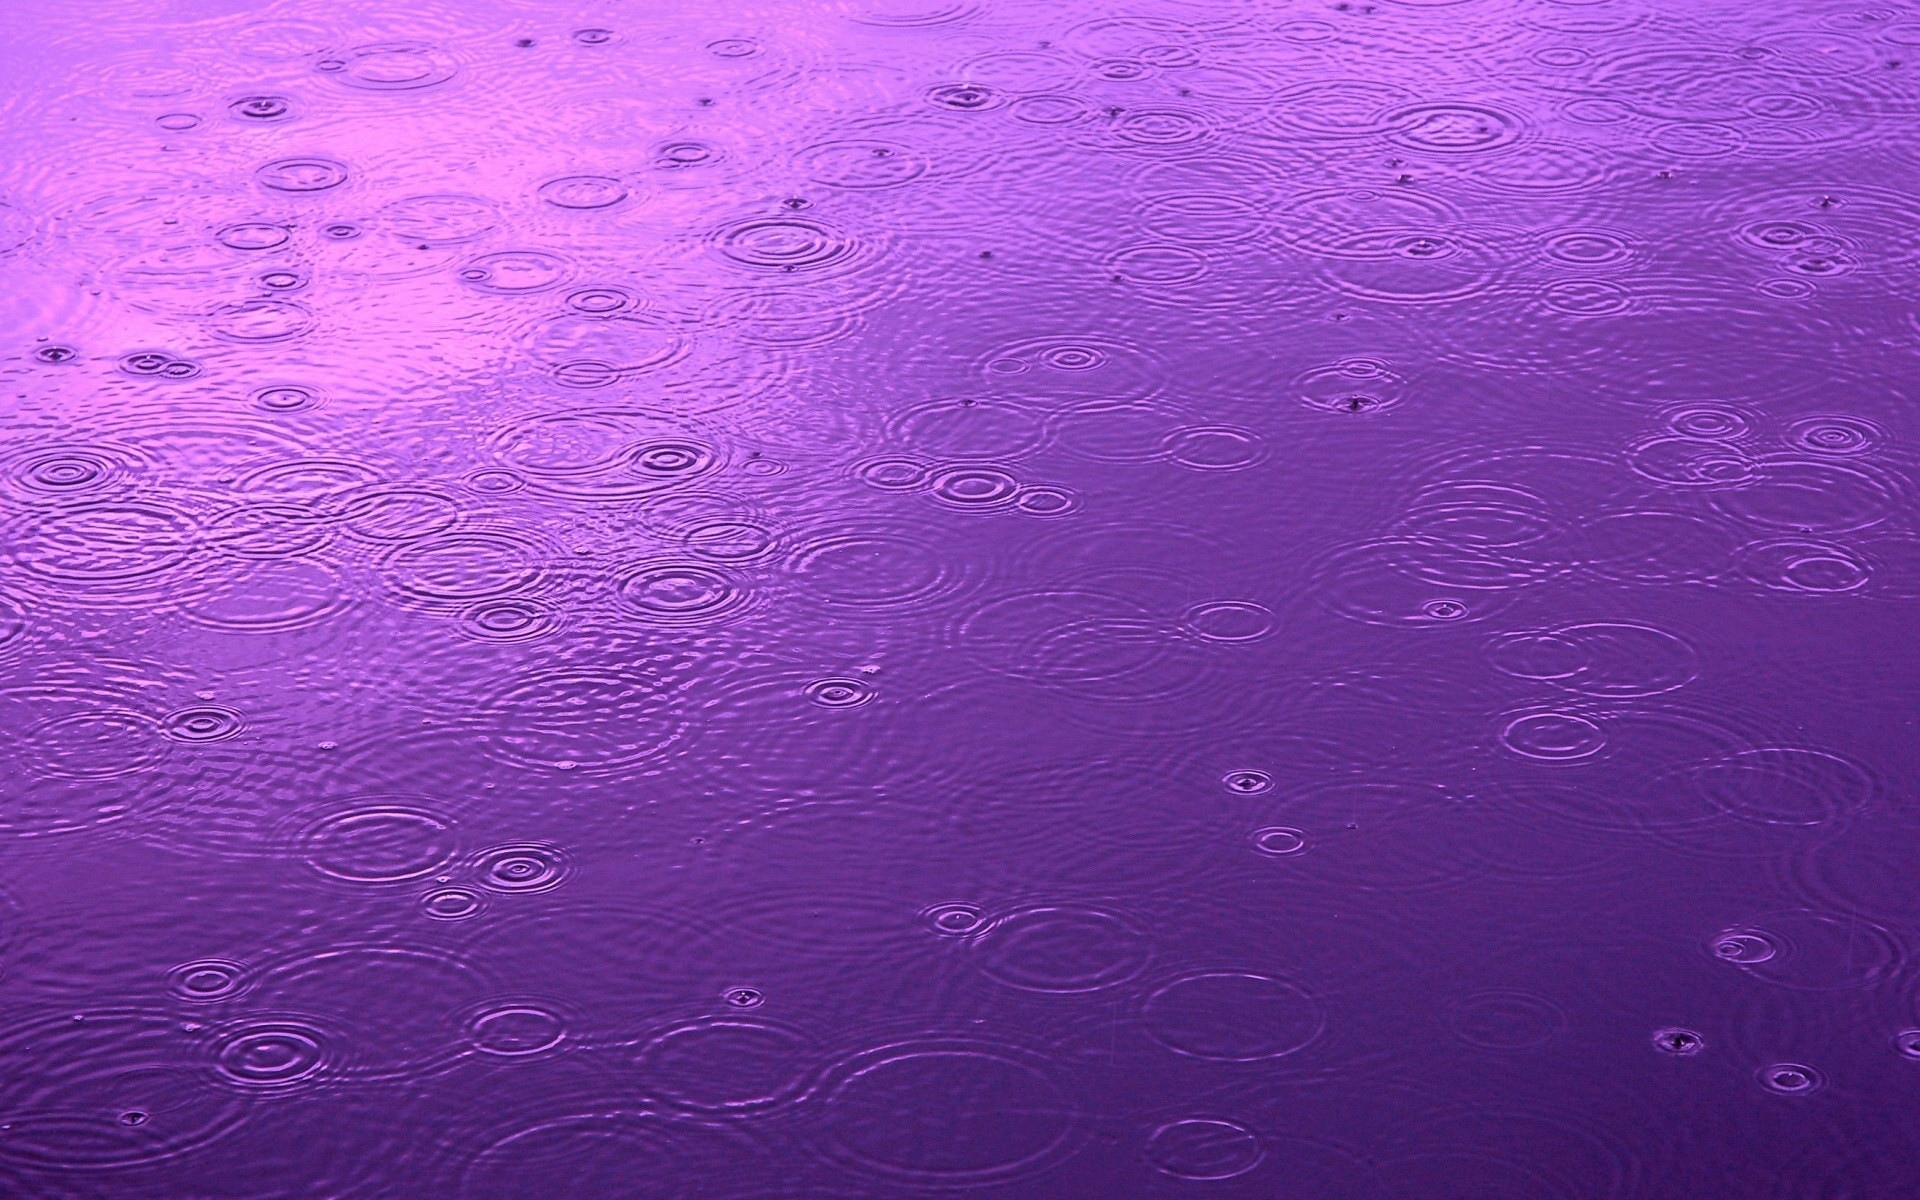 66 Raindrop HD Wallpapers | Backgrounds - Wallpaper Abyss